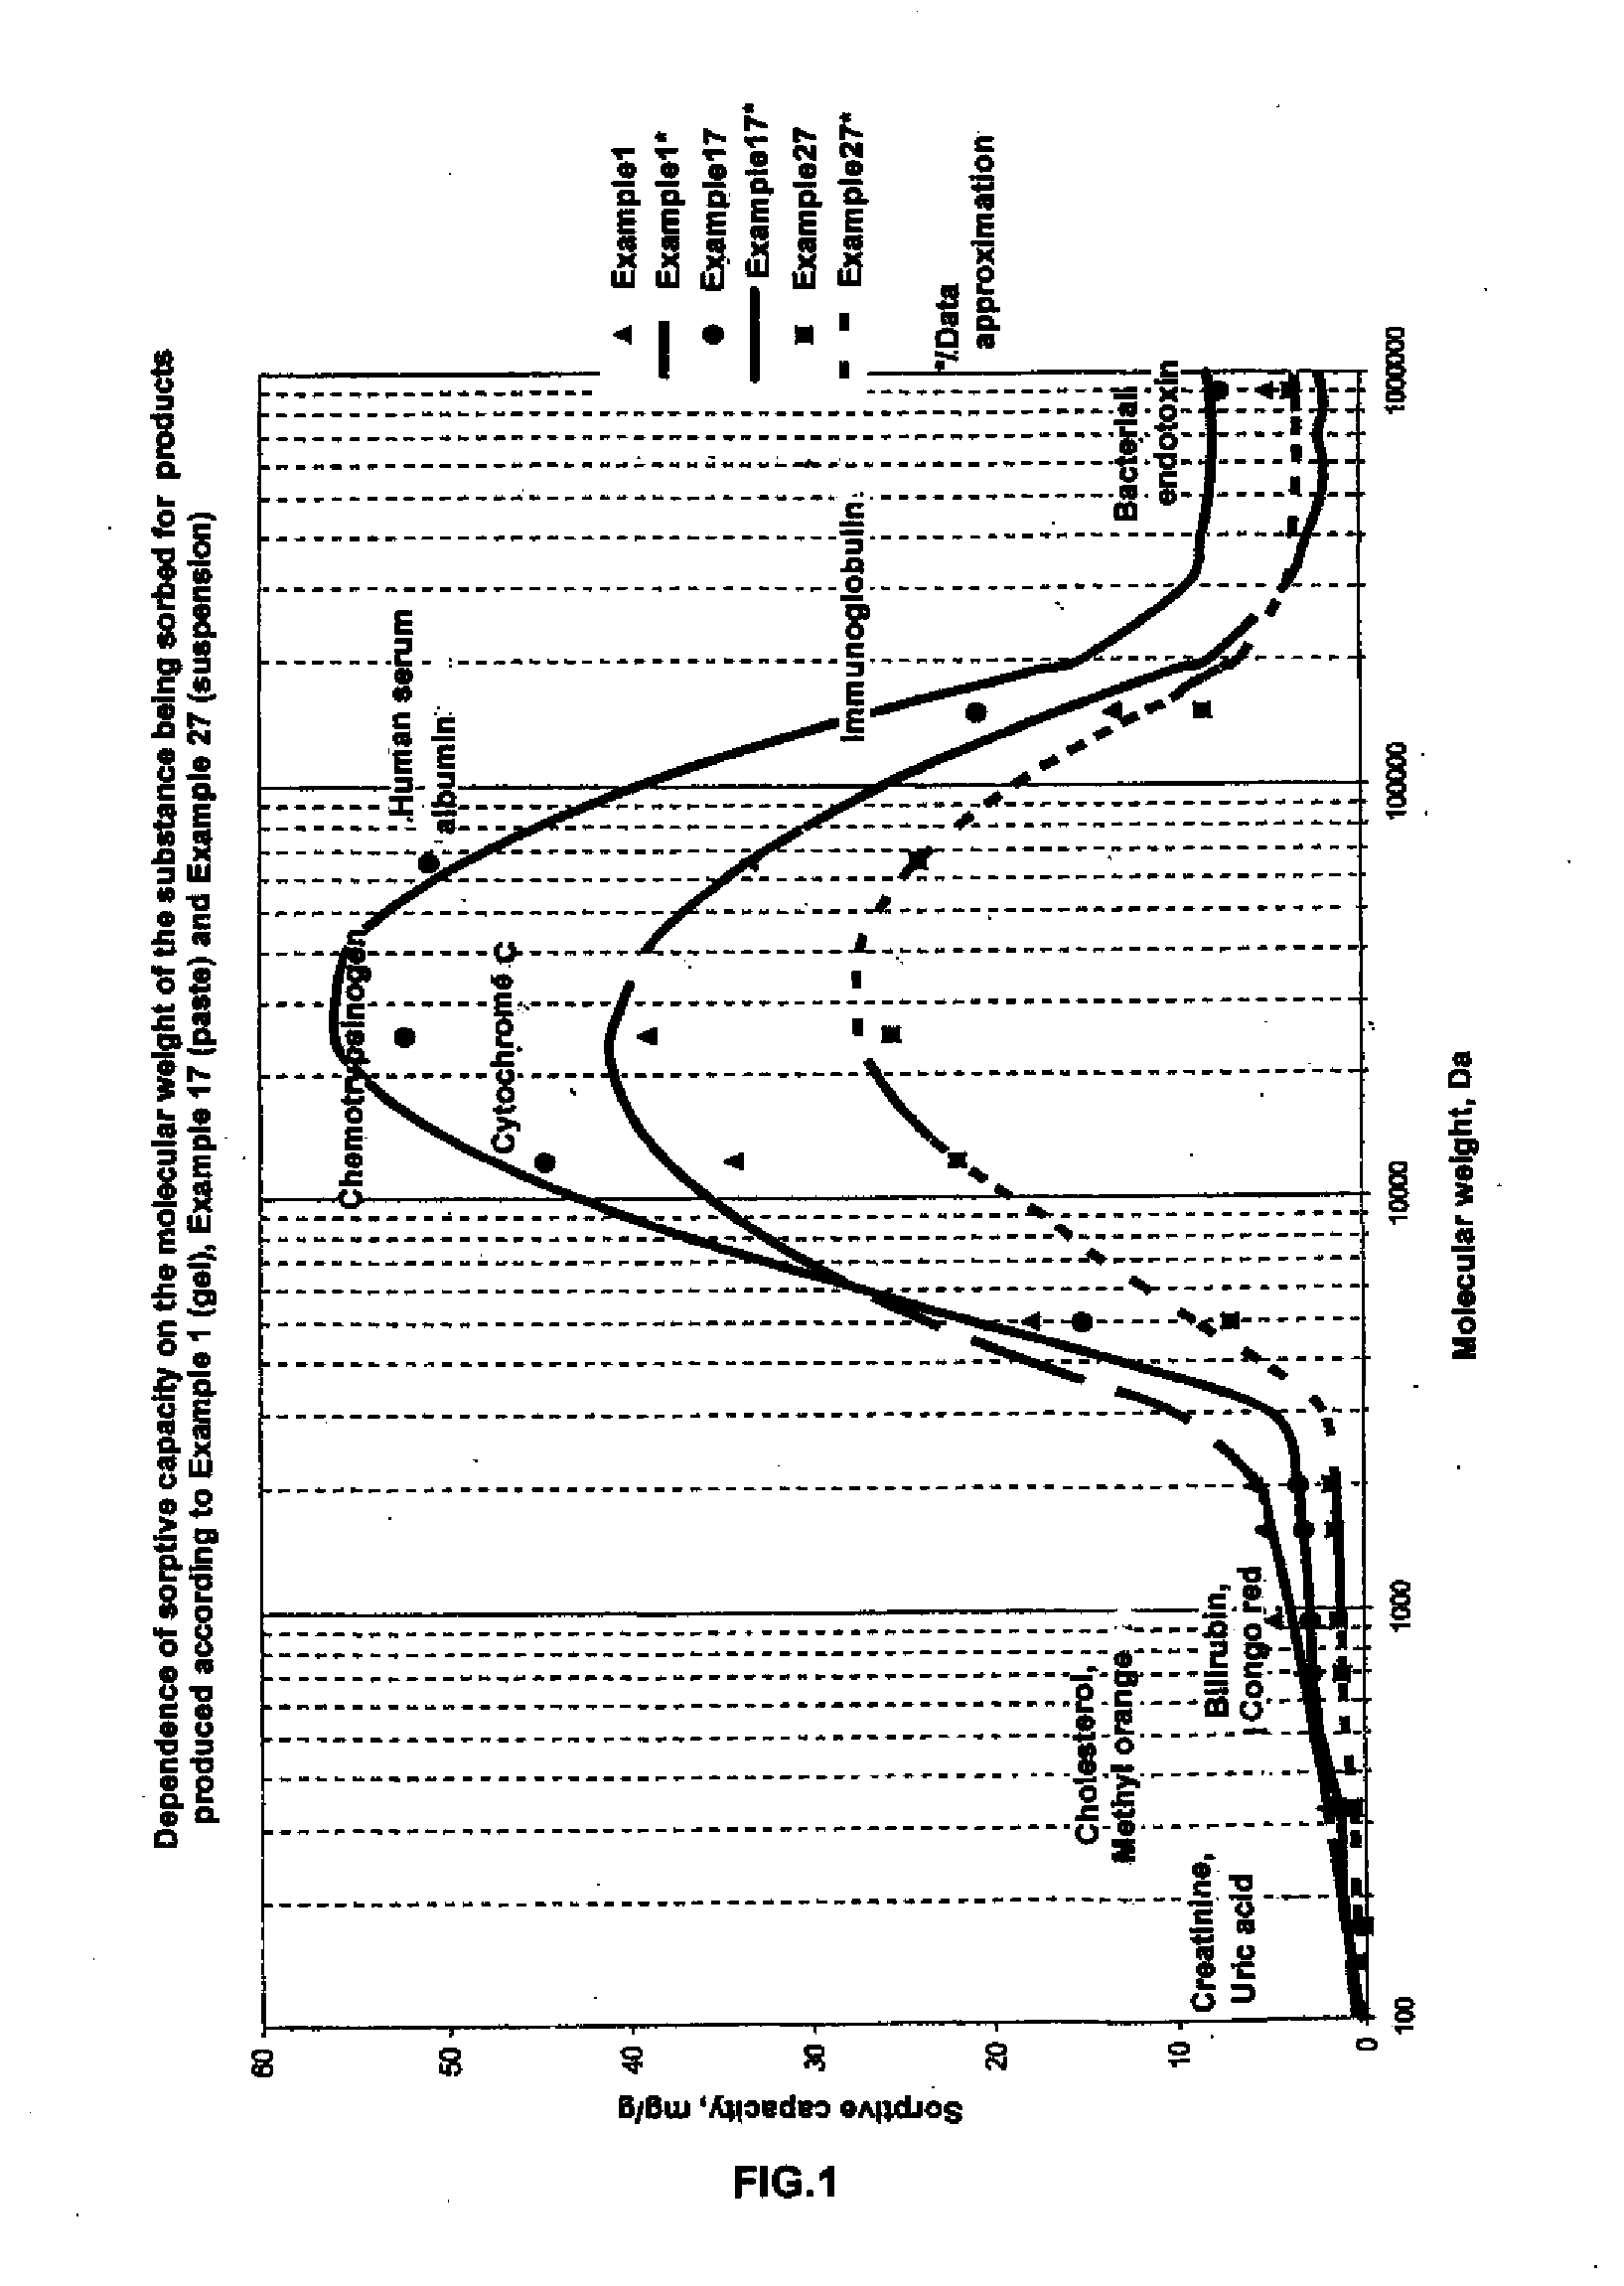 Method for producing a sorbent based on a methyl-silicic acid hydrogel